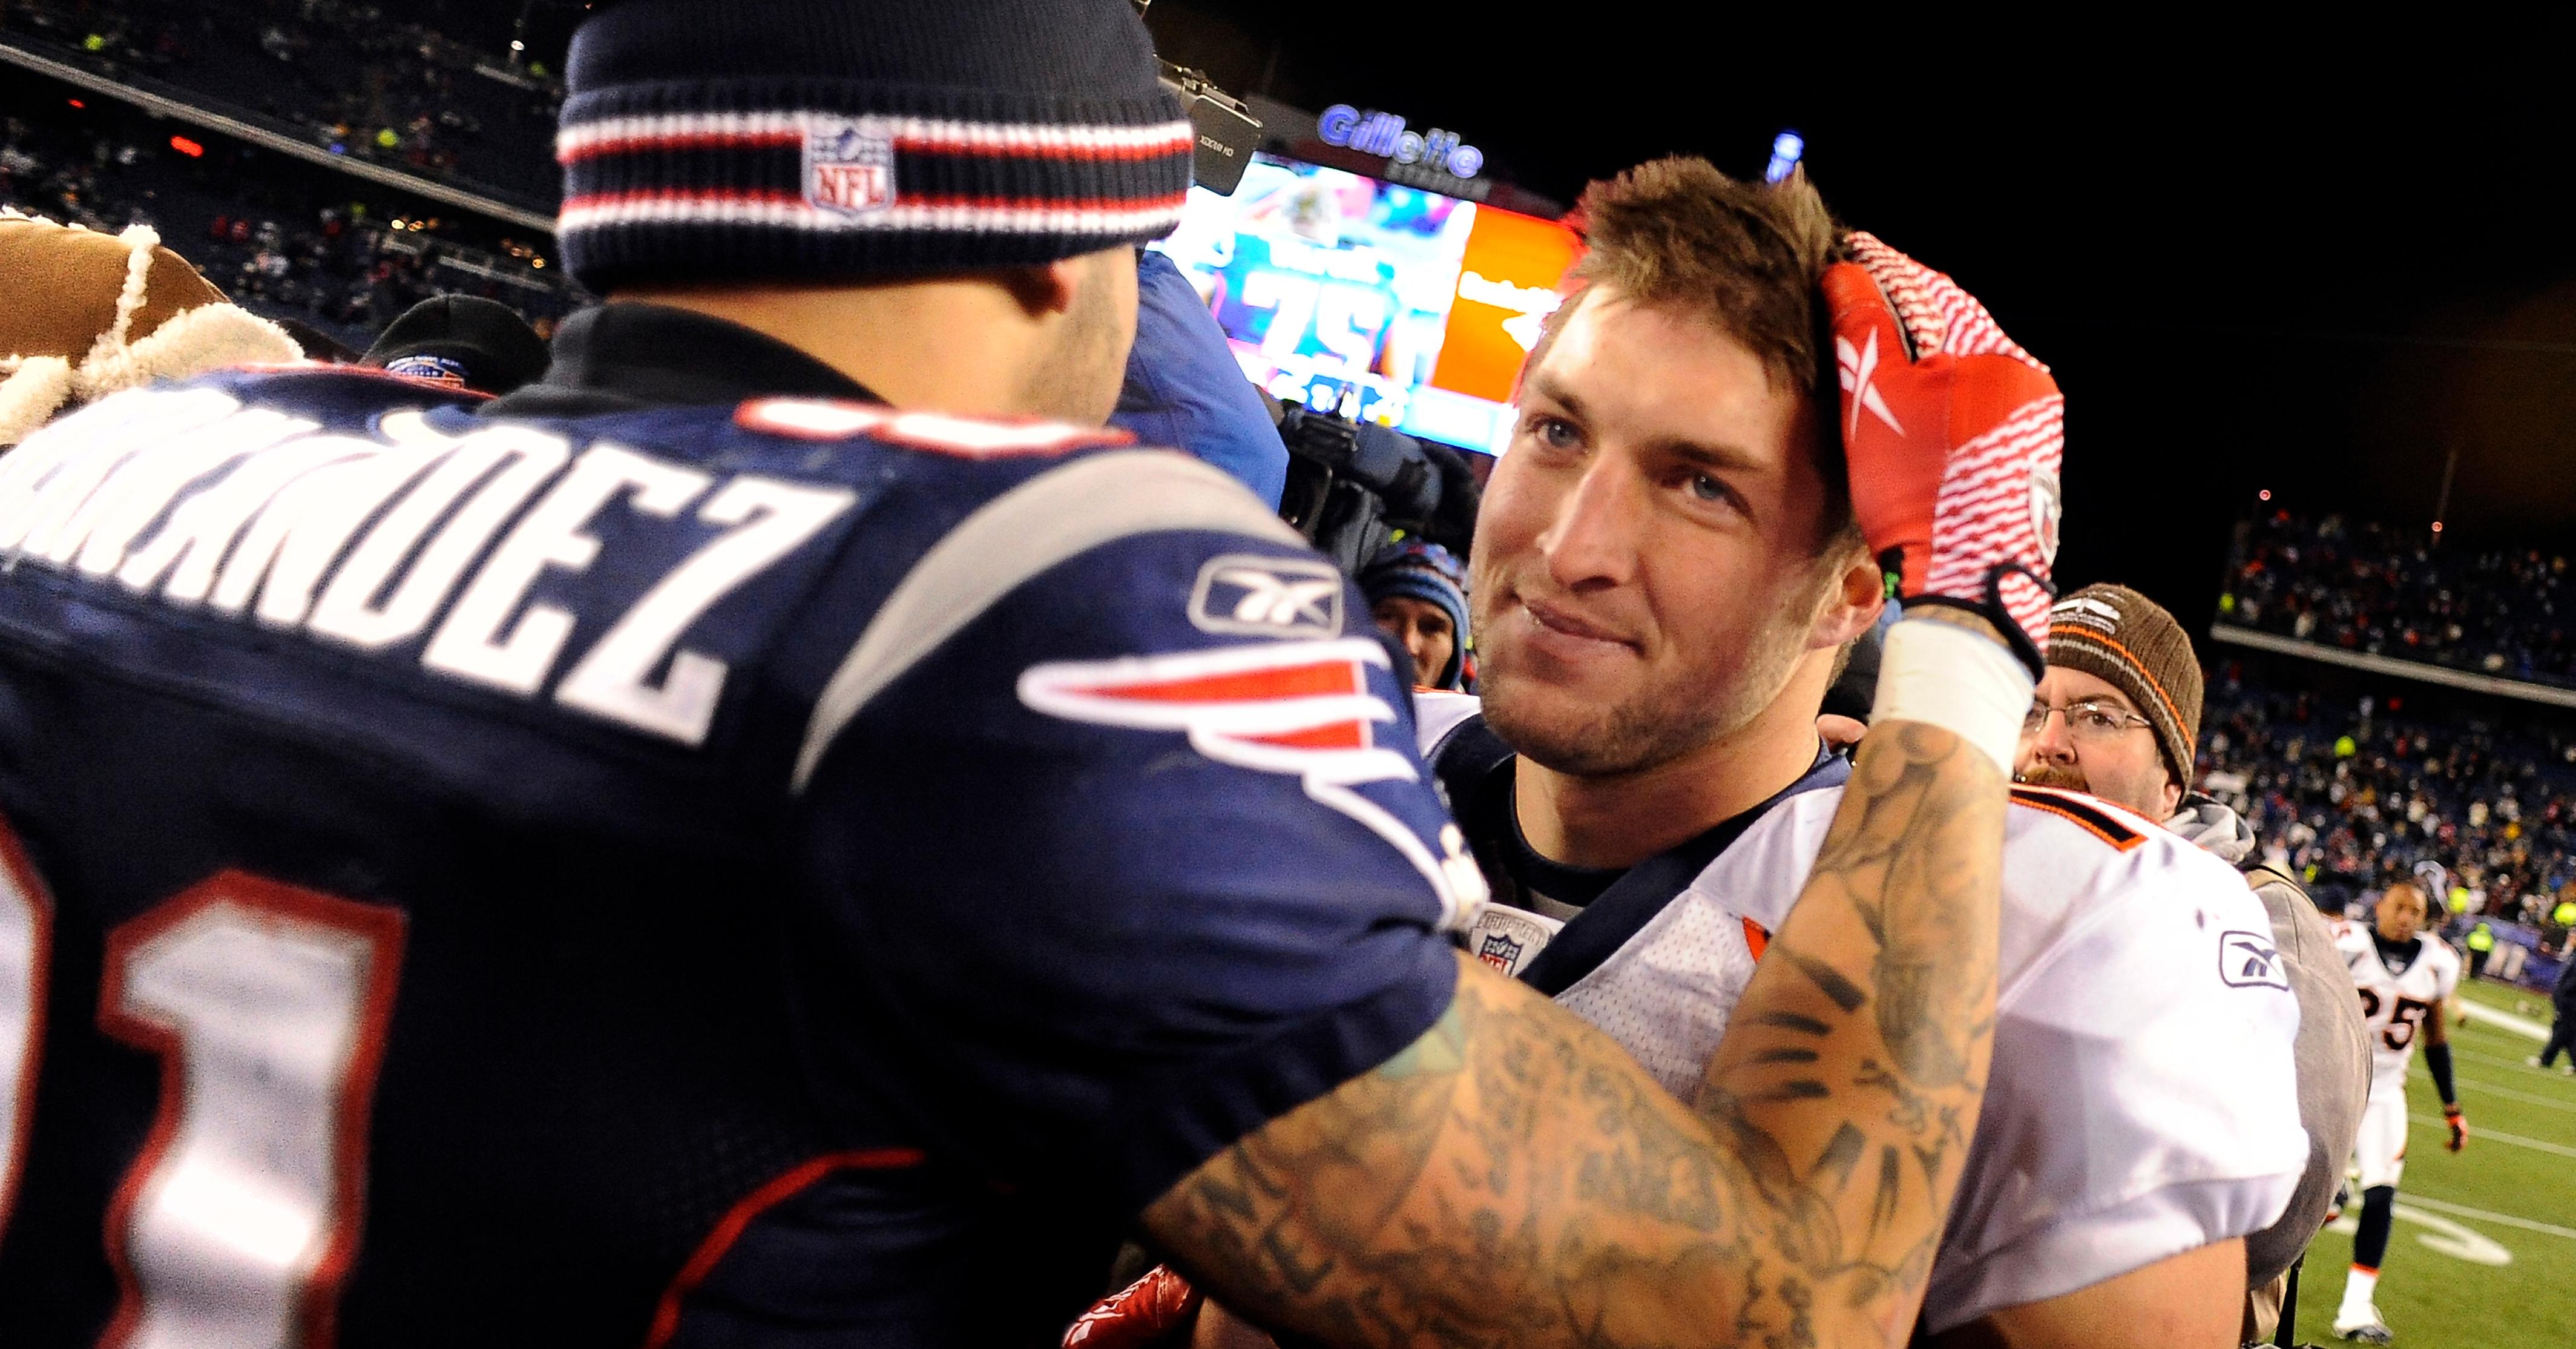 An Inside Look at Aaron Hernandez and Tebow's Friendship